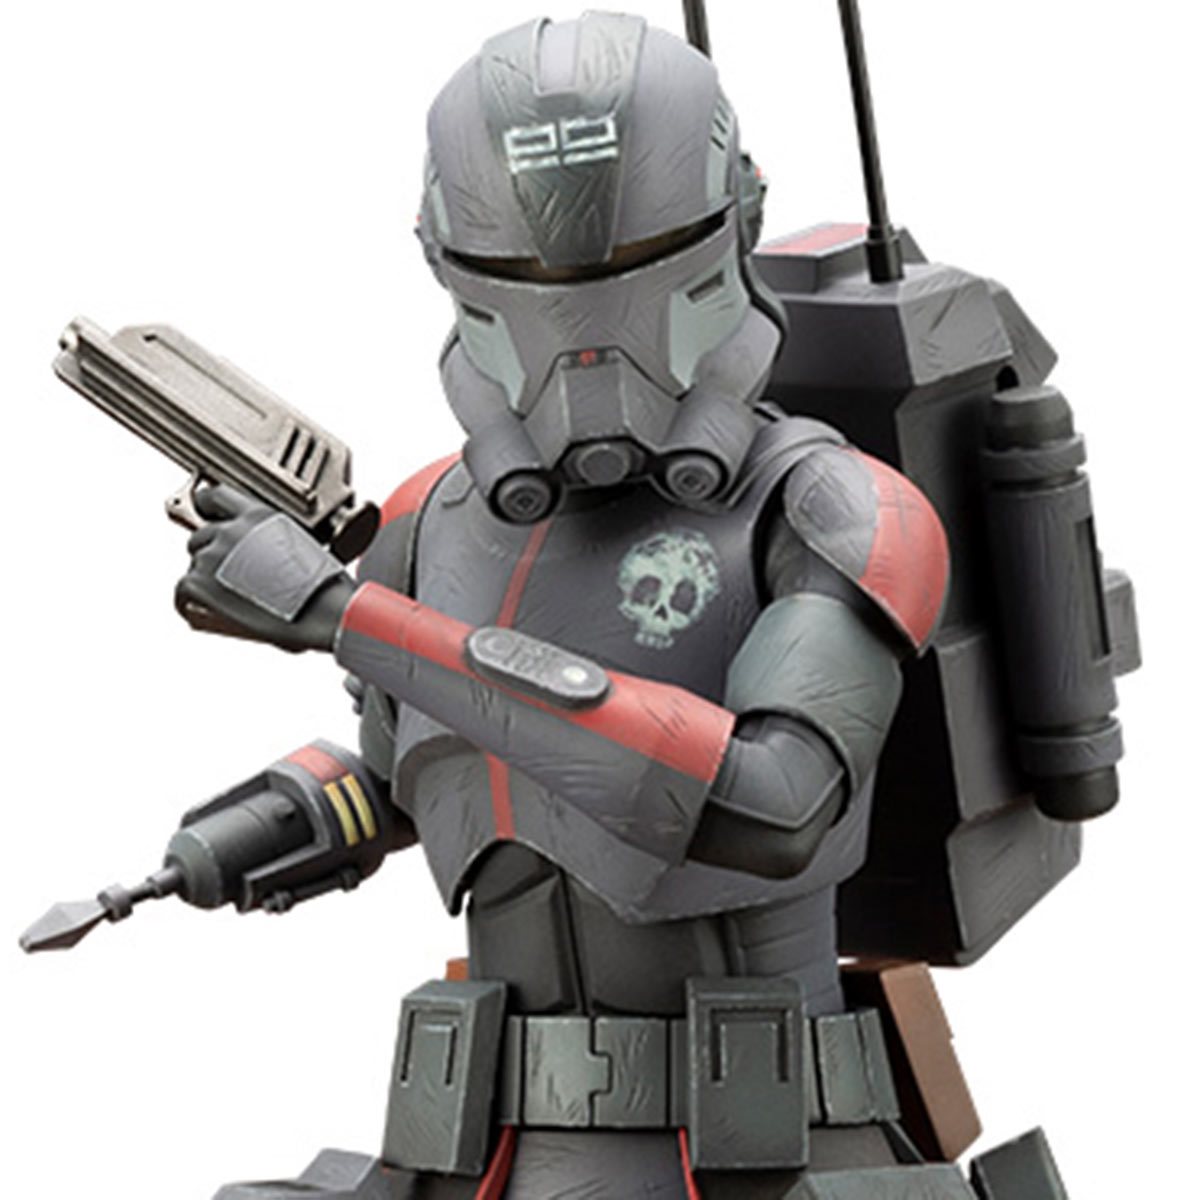 Hasbro Star Wars The Bad Batch Echo The Black Series 6 In Action